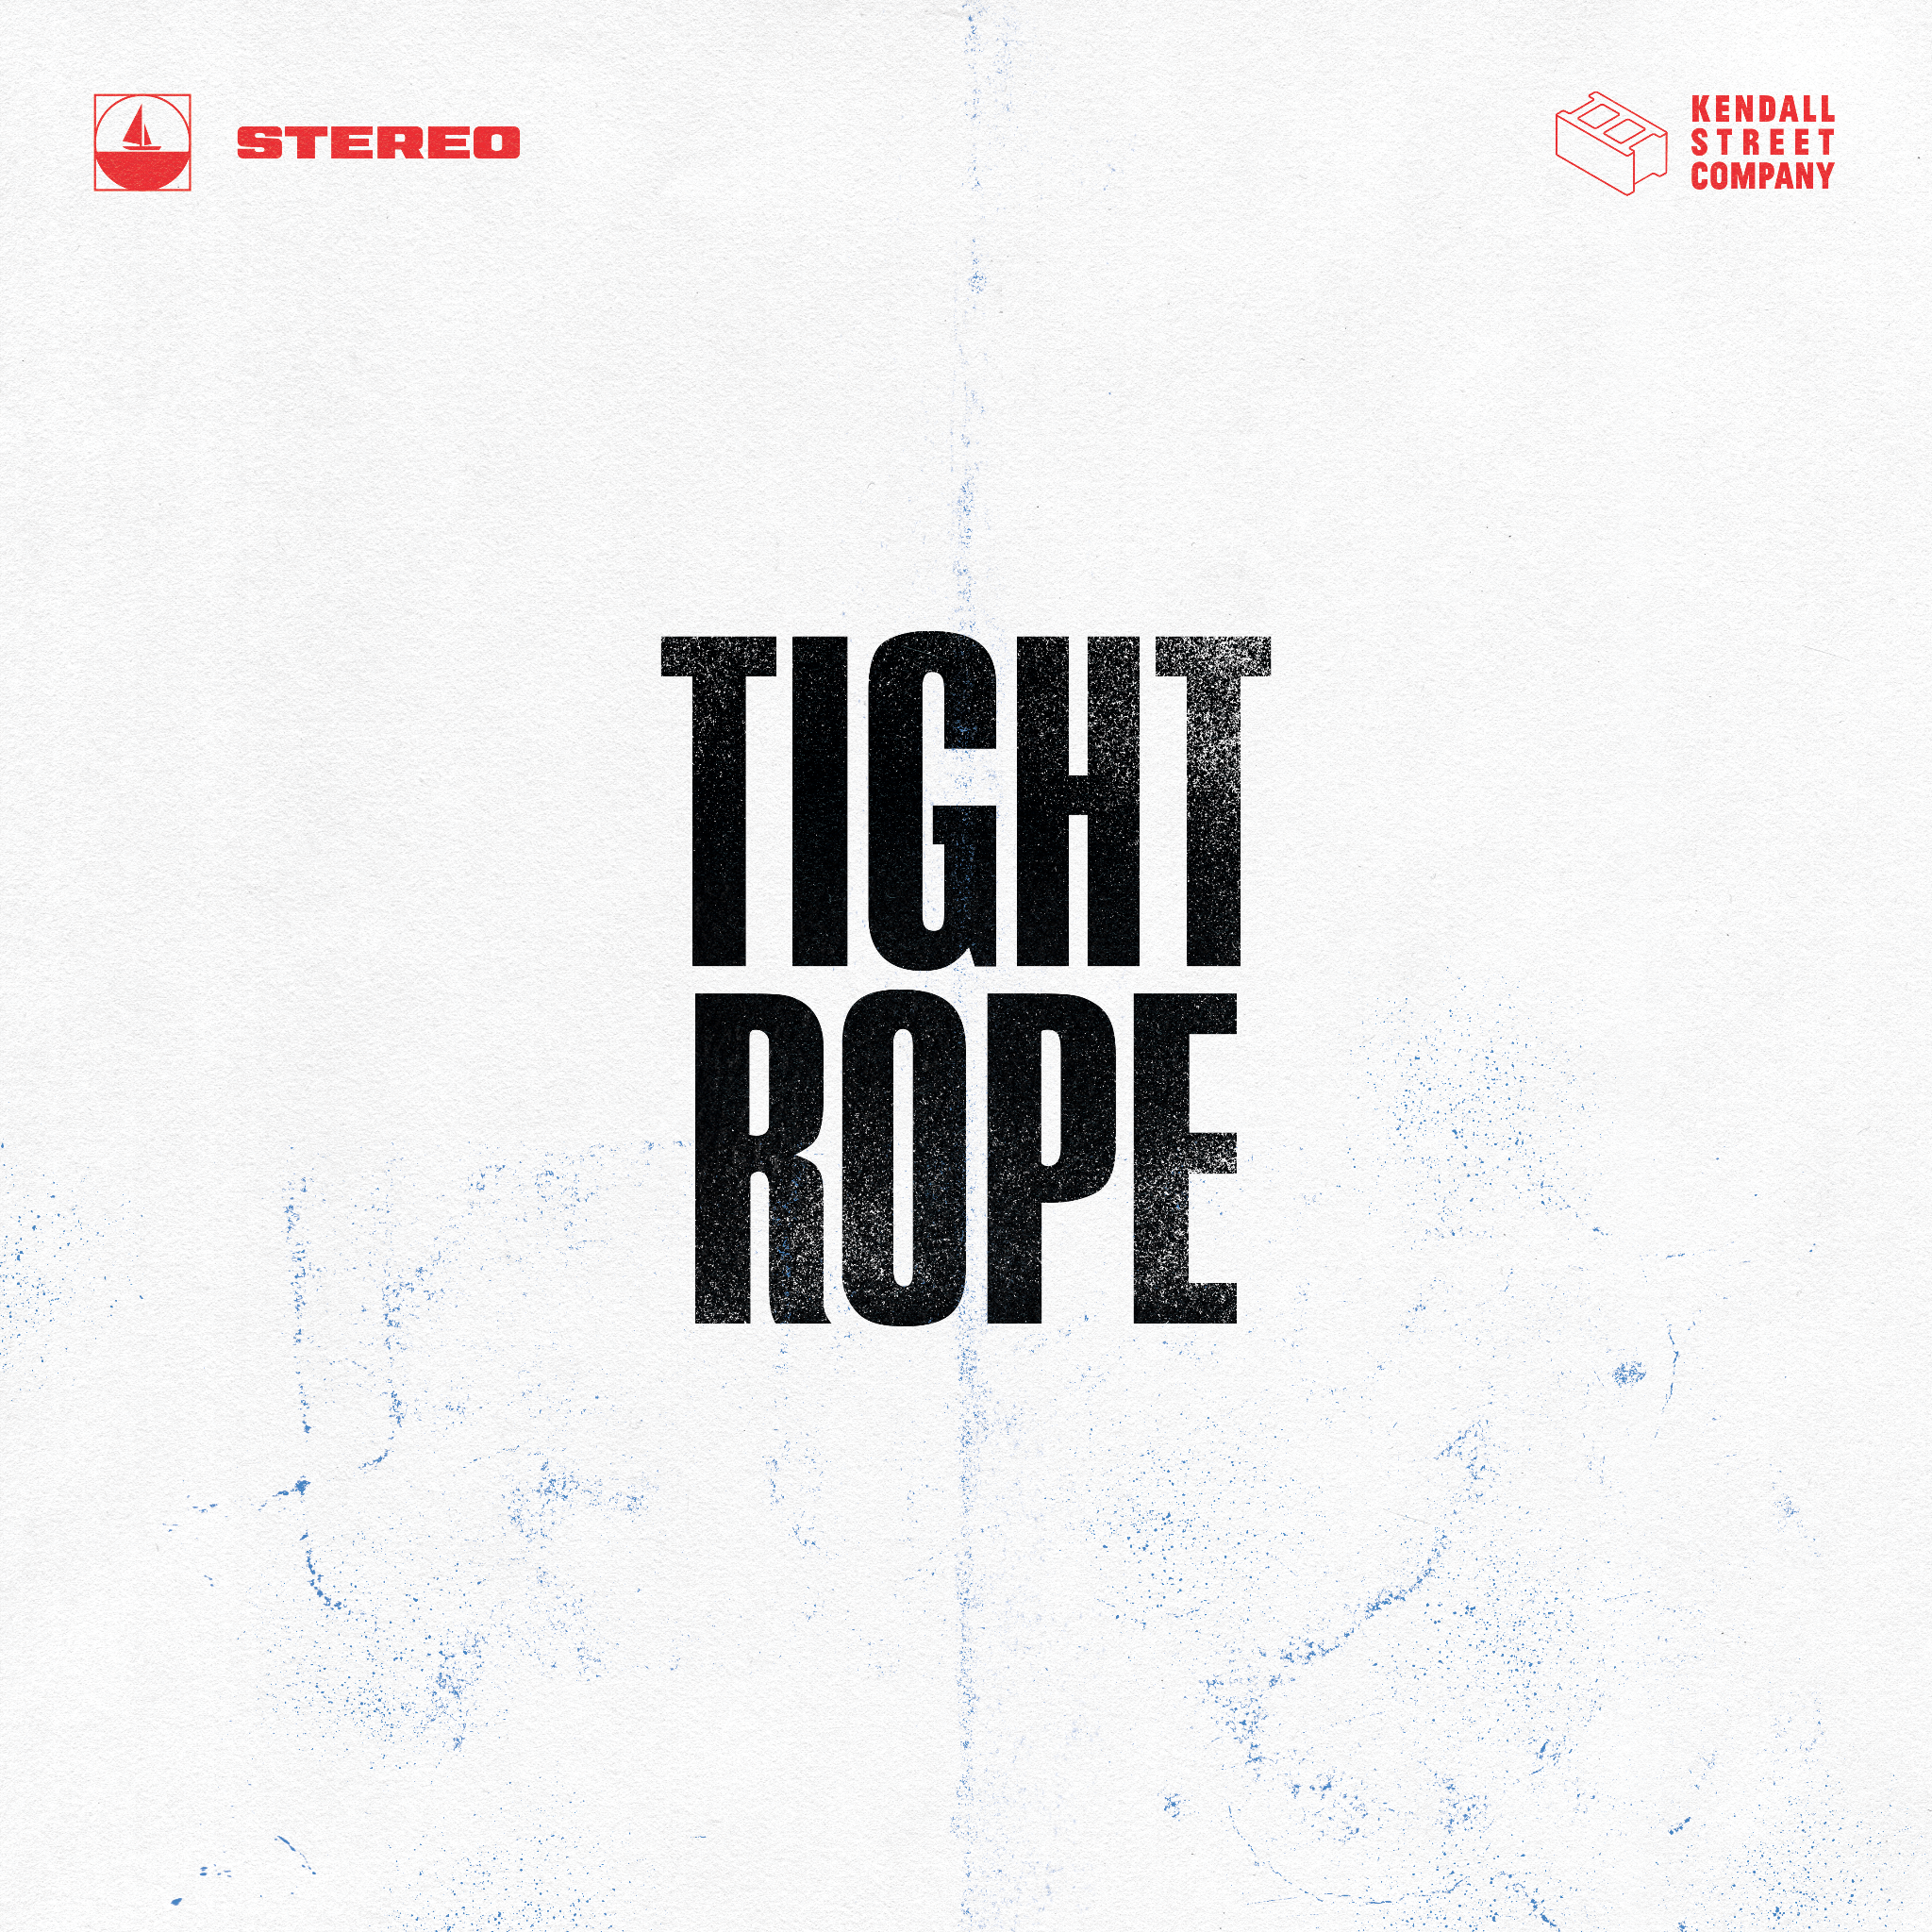 Kendall Street Company Releases New Single & Music Video for "Tightrope"